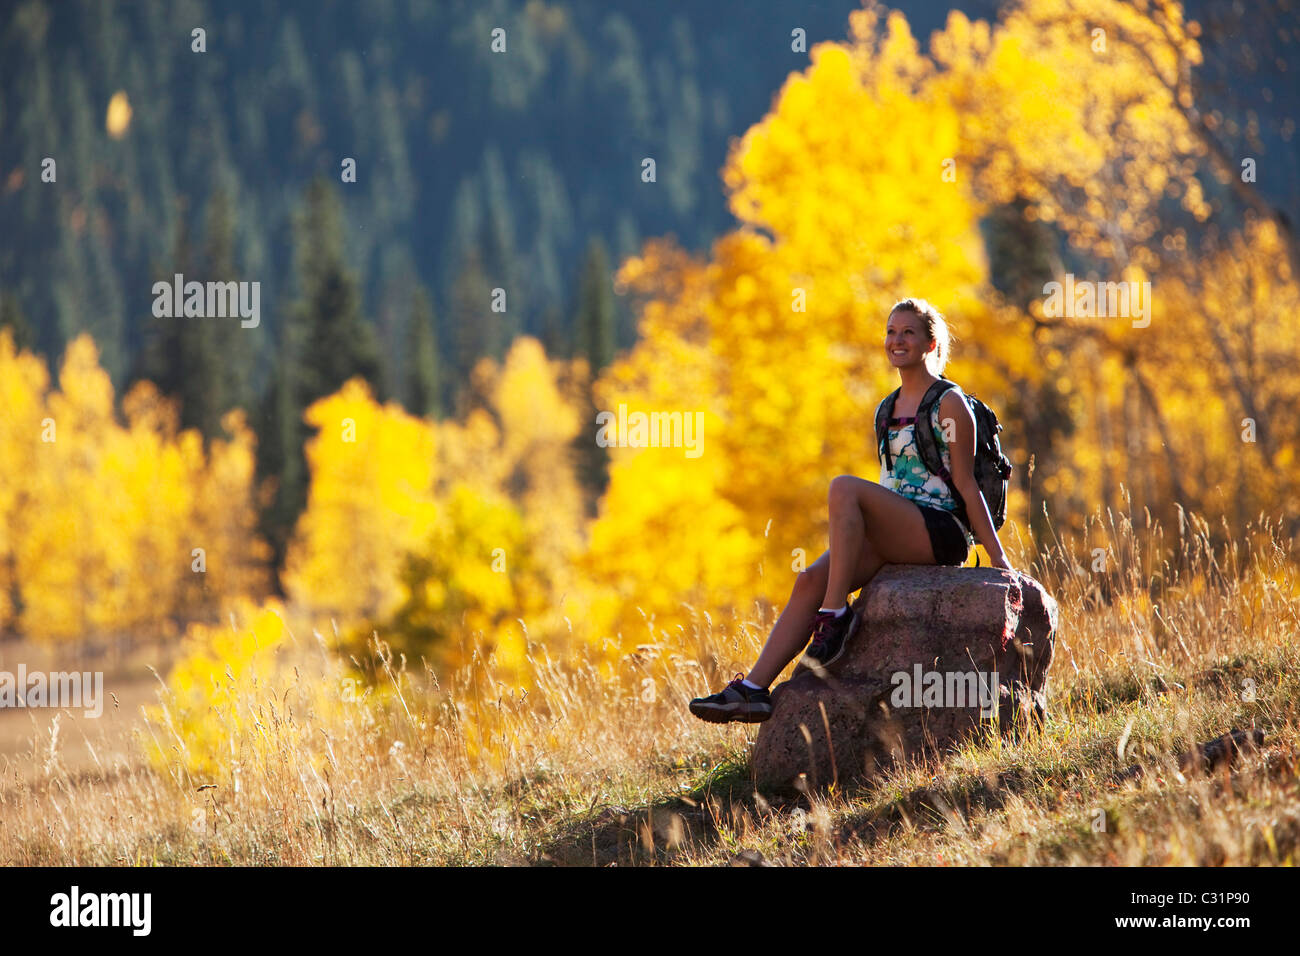 A young woman hiking stops and enjoys the beauty of the golden fall colors. Stock Photo